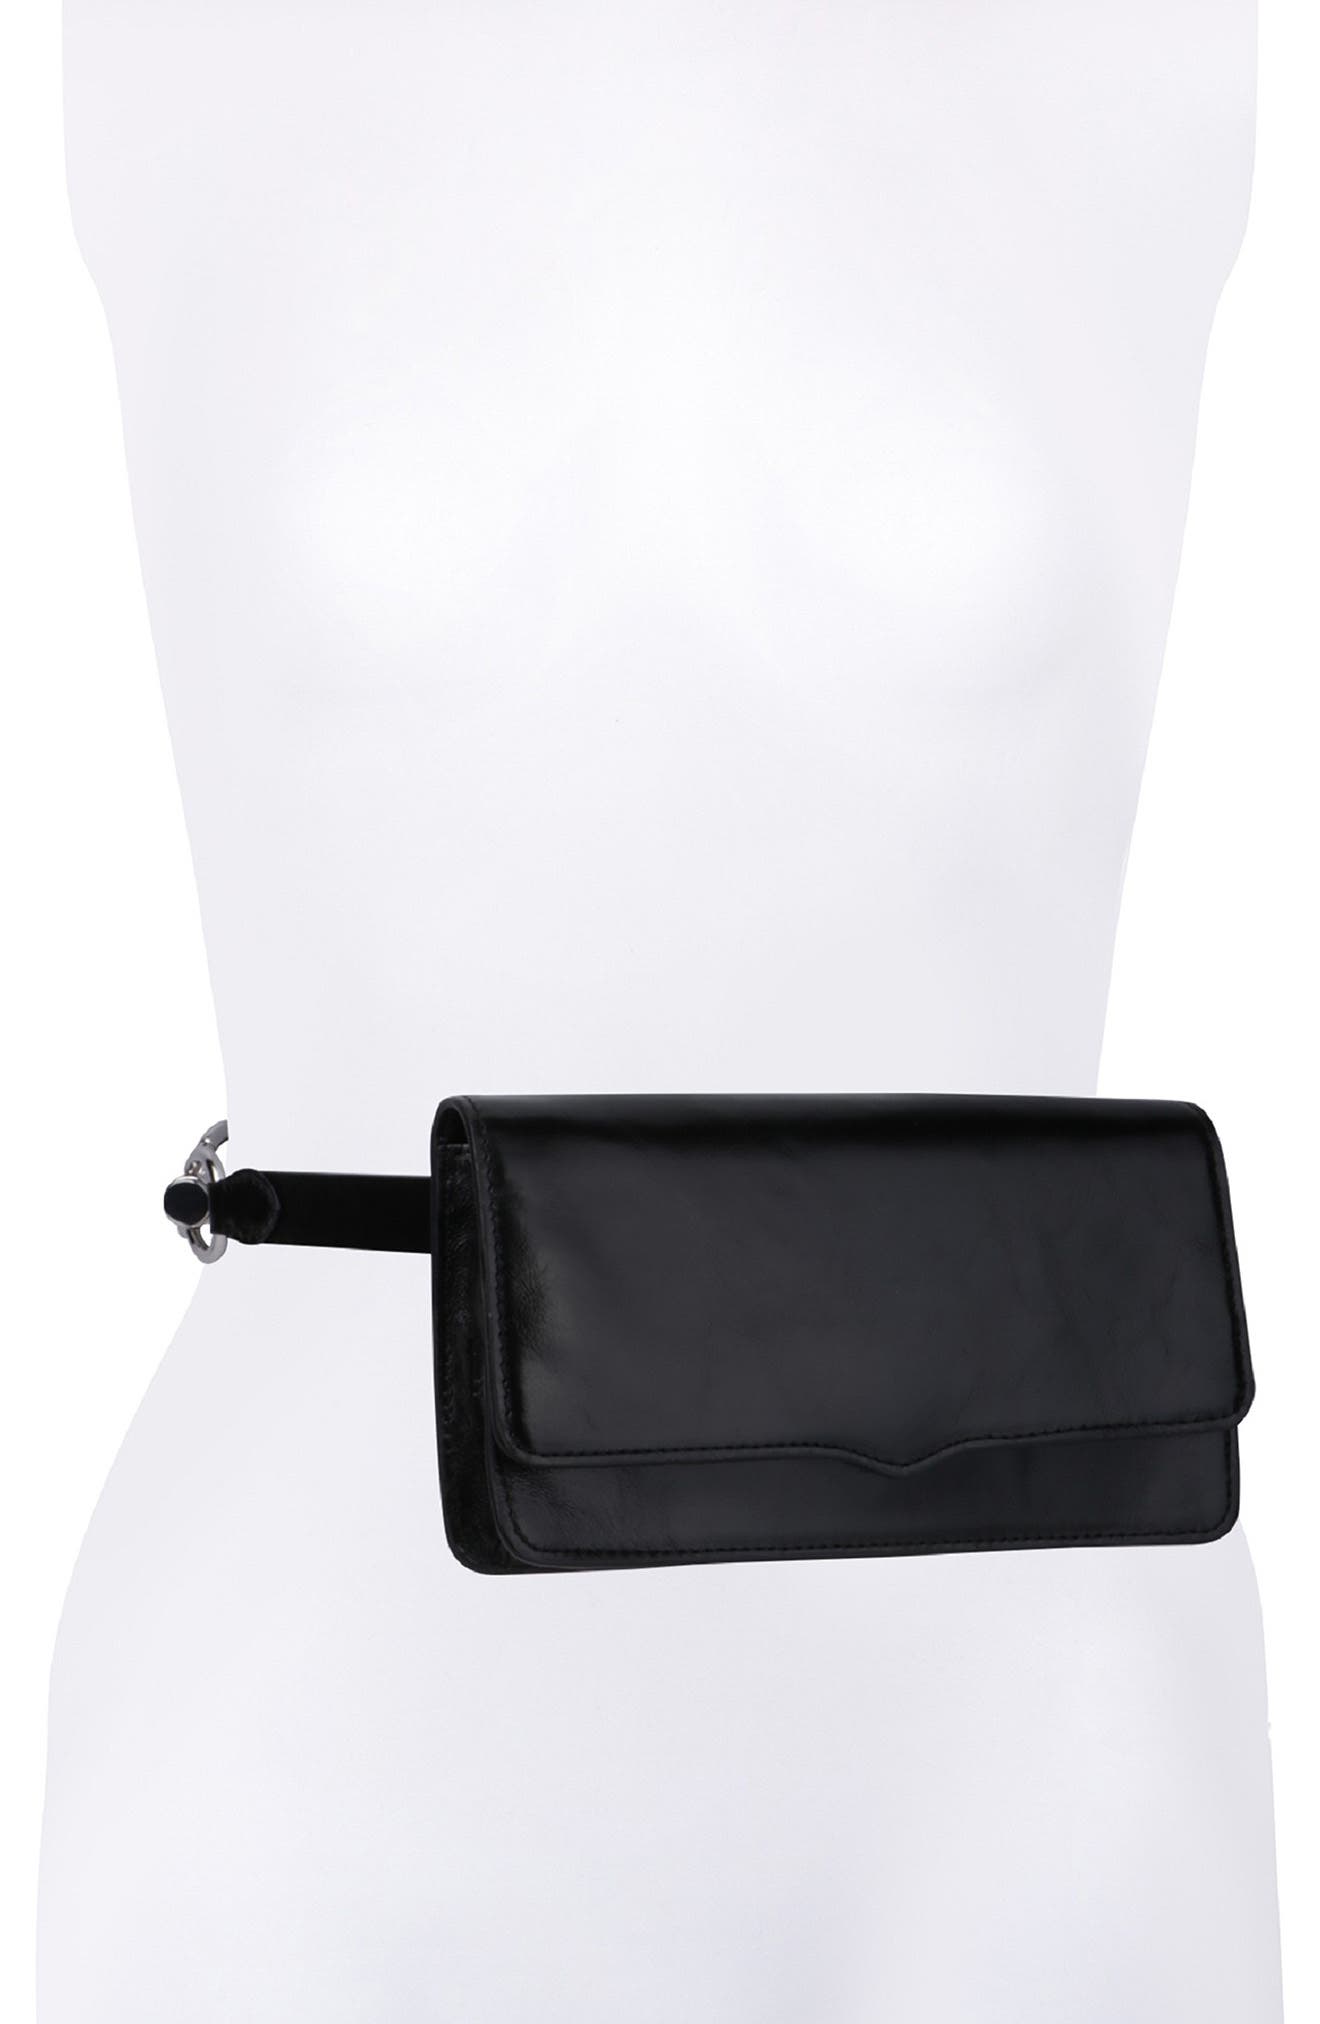 Rebecca Minkoff Leather Belt Bag in Black at Nordstrom, Size Small